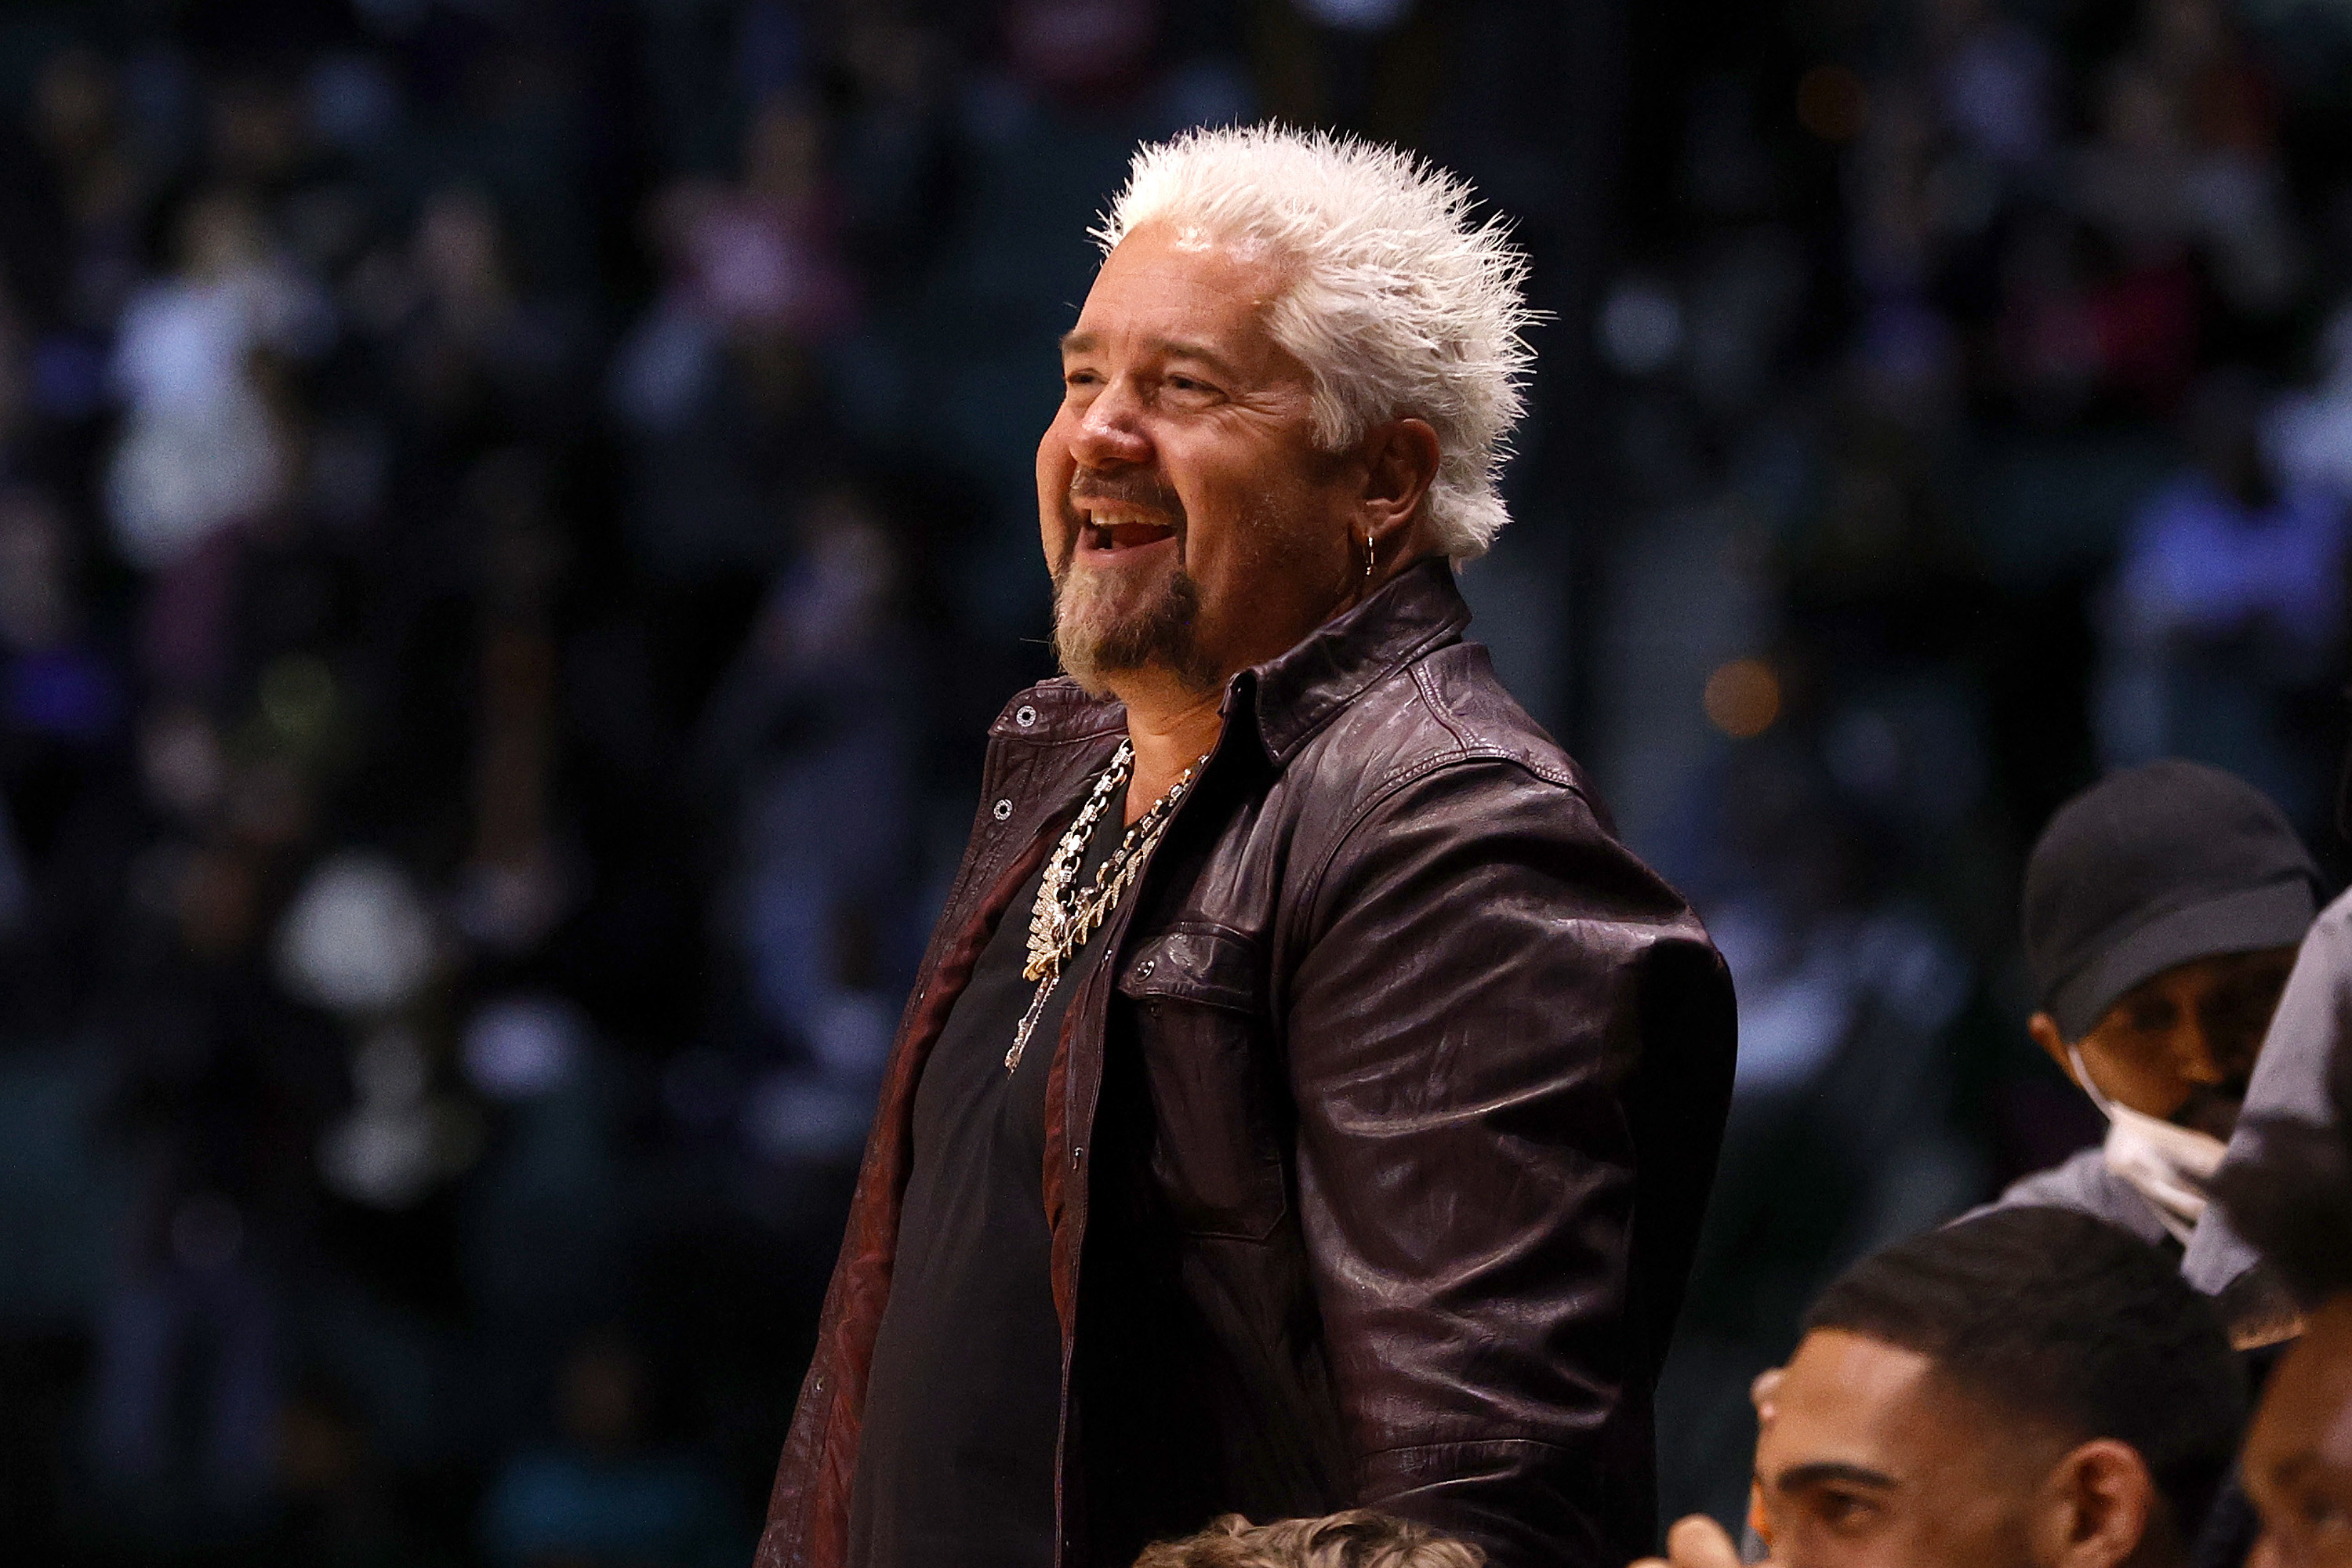 Guy Fieri at a basketball game